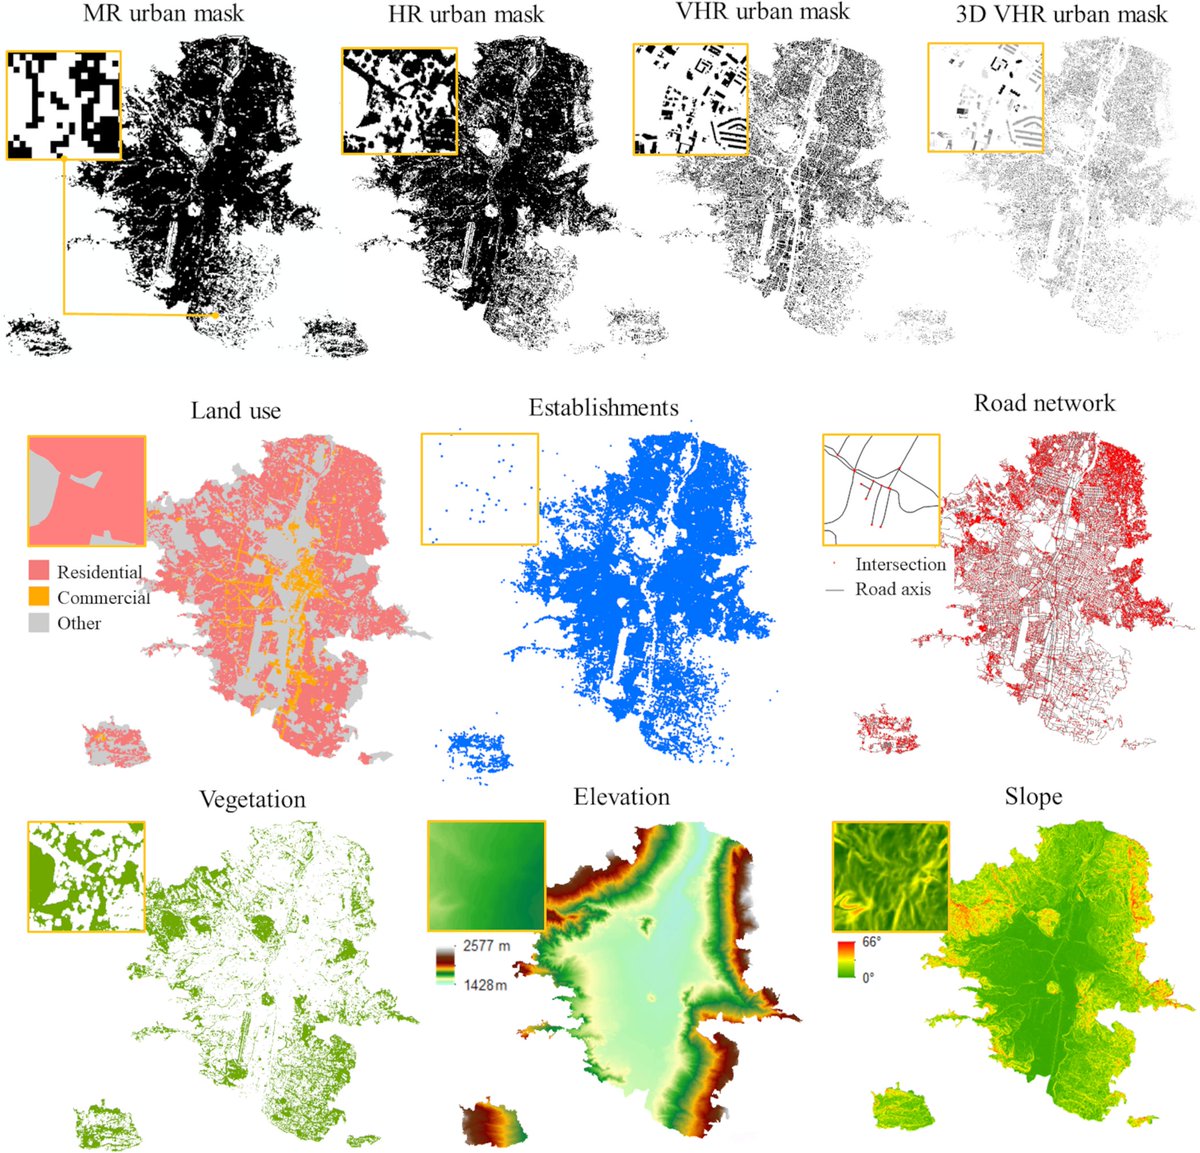 .@marta_sapena et al. (2022) compare several methods for disaggregating population figures from higher-resolution #geospatial and #remotesensing data into fine-grained population maps to recommend the best approach based on input data. #LoLManuscriptMonday bit.ly/Sapena_2022